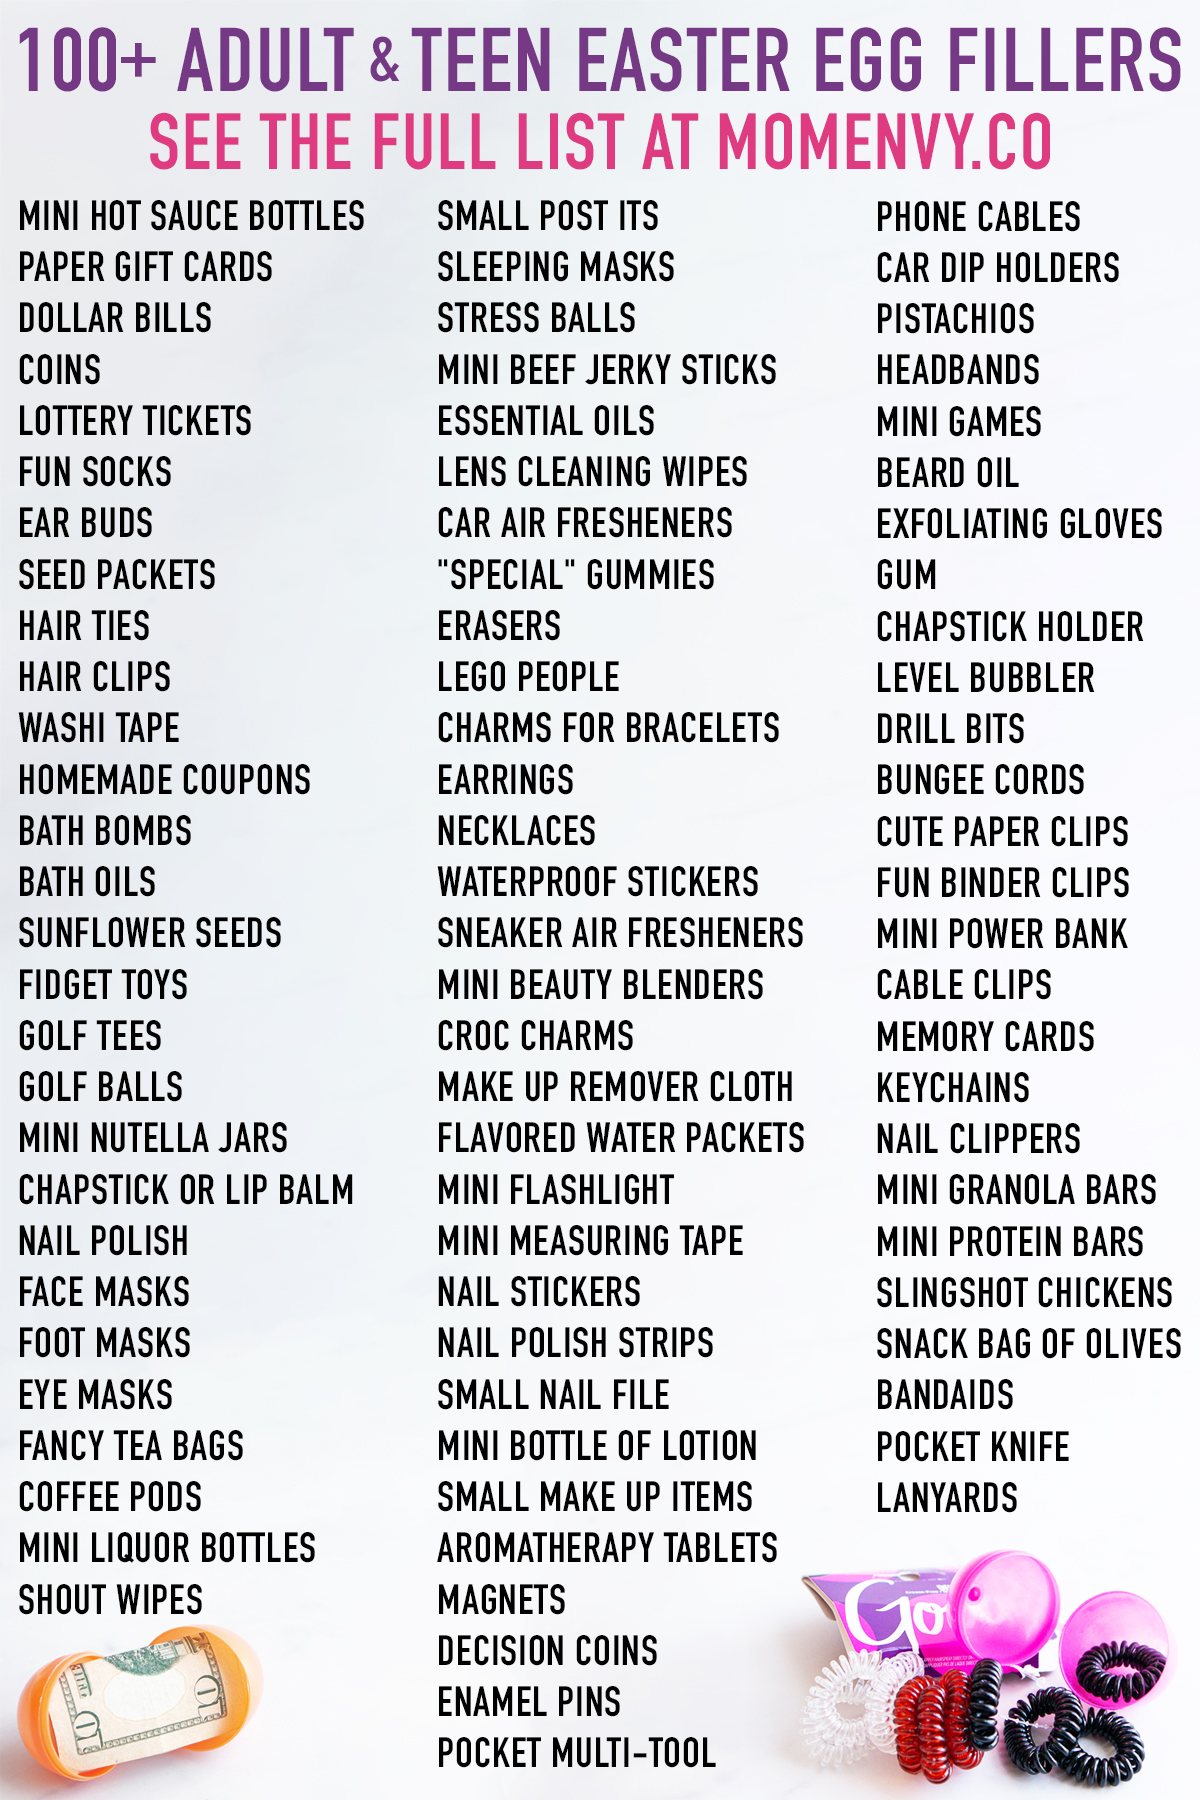 At the top it says 100+ adult & teens easter egg ideas. See the full list at momenvy.co Below that is a list of non candy easter egg fillers.